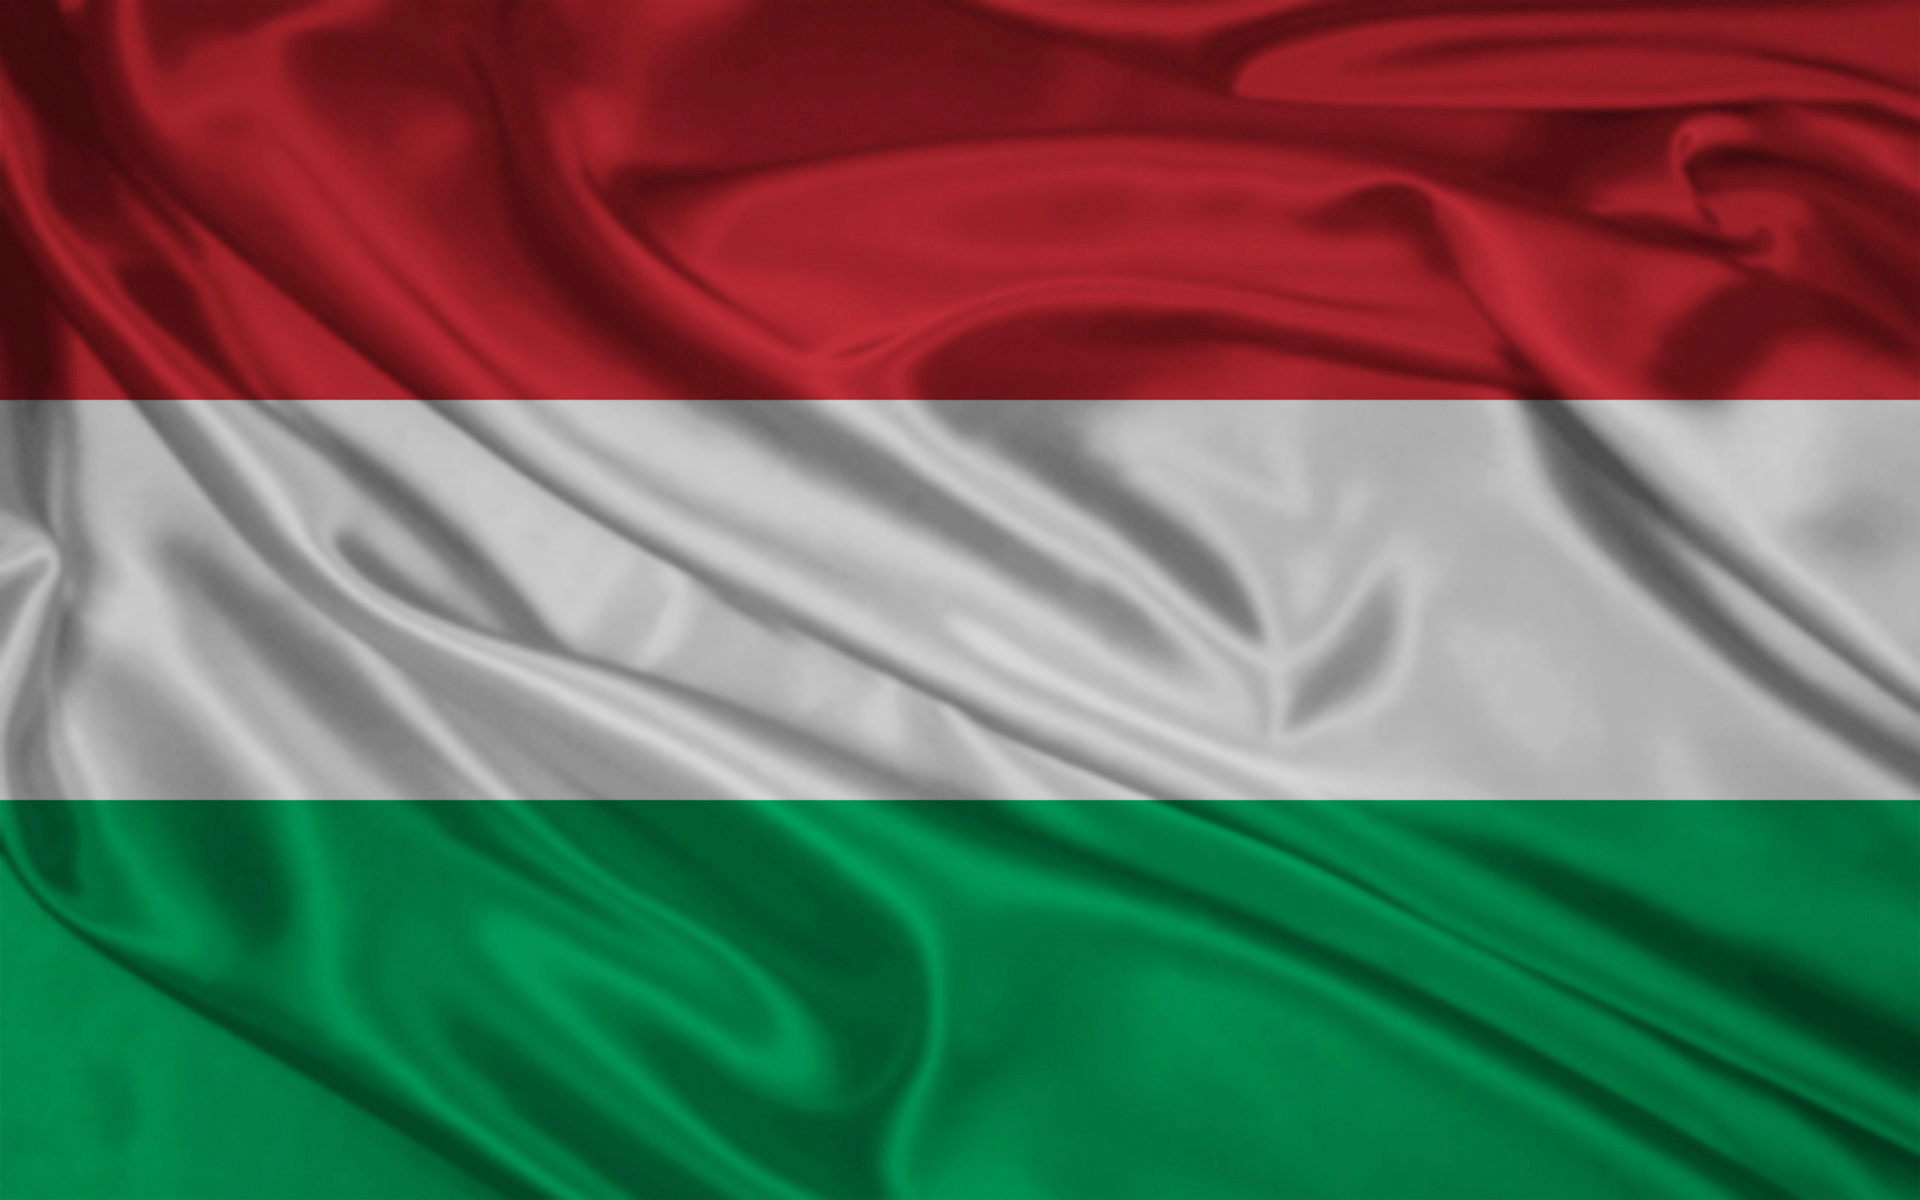 Hungary could see regulation